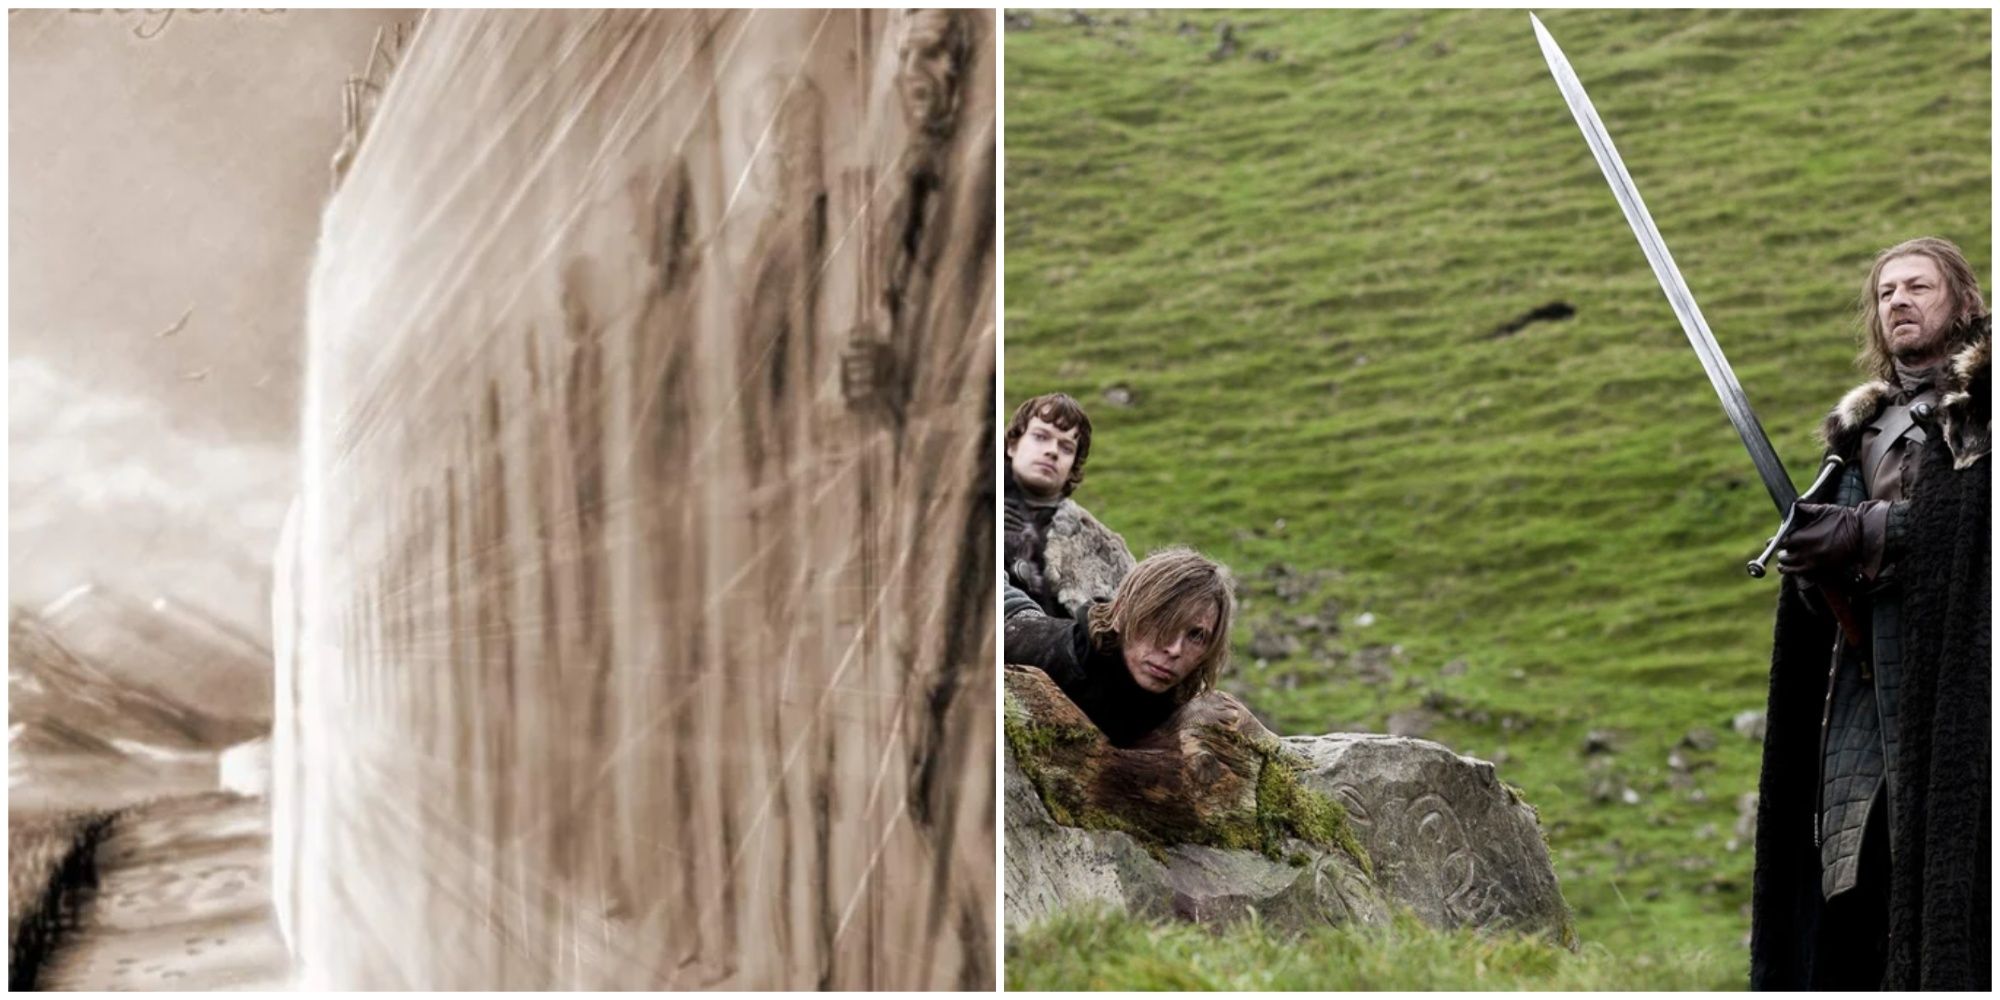 Split image of the Seventy-nine Sentinels' illustration on A Wiki of Ice and Fire and Ned Stark's Ice in Game of Thrones.